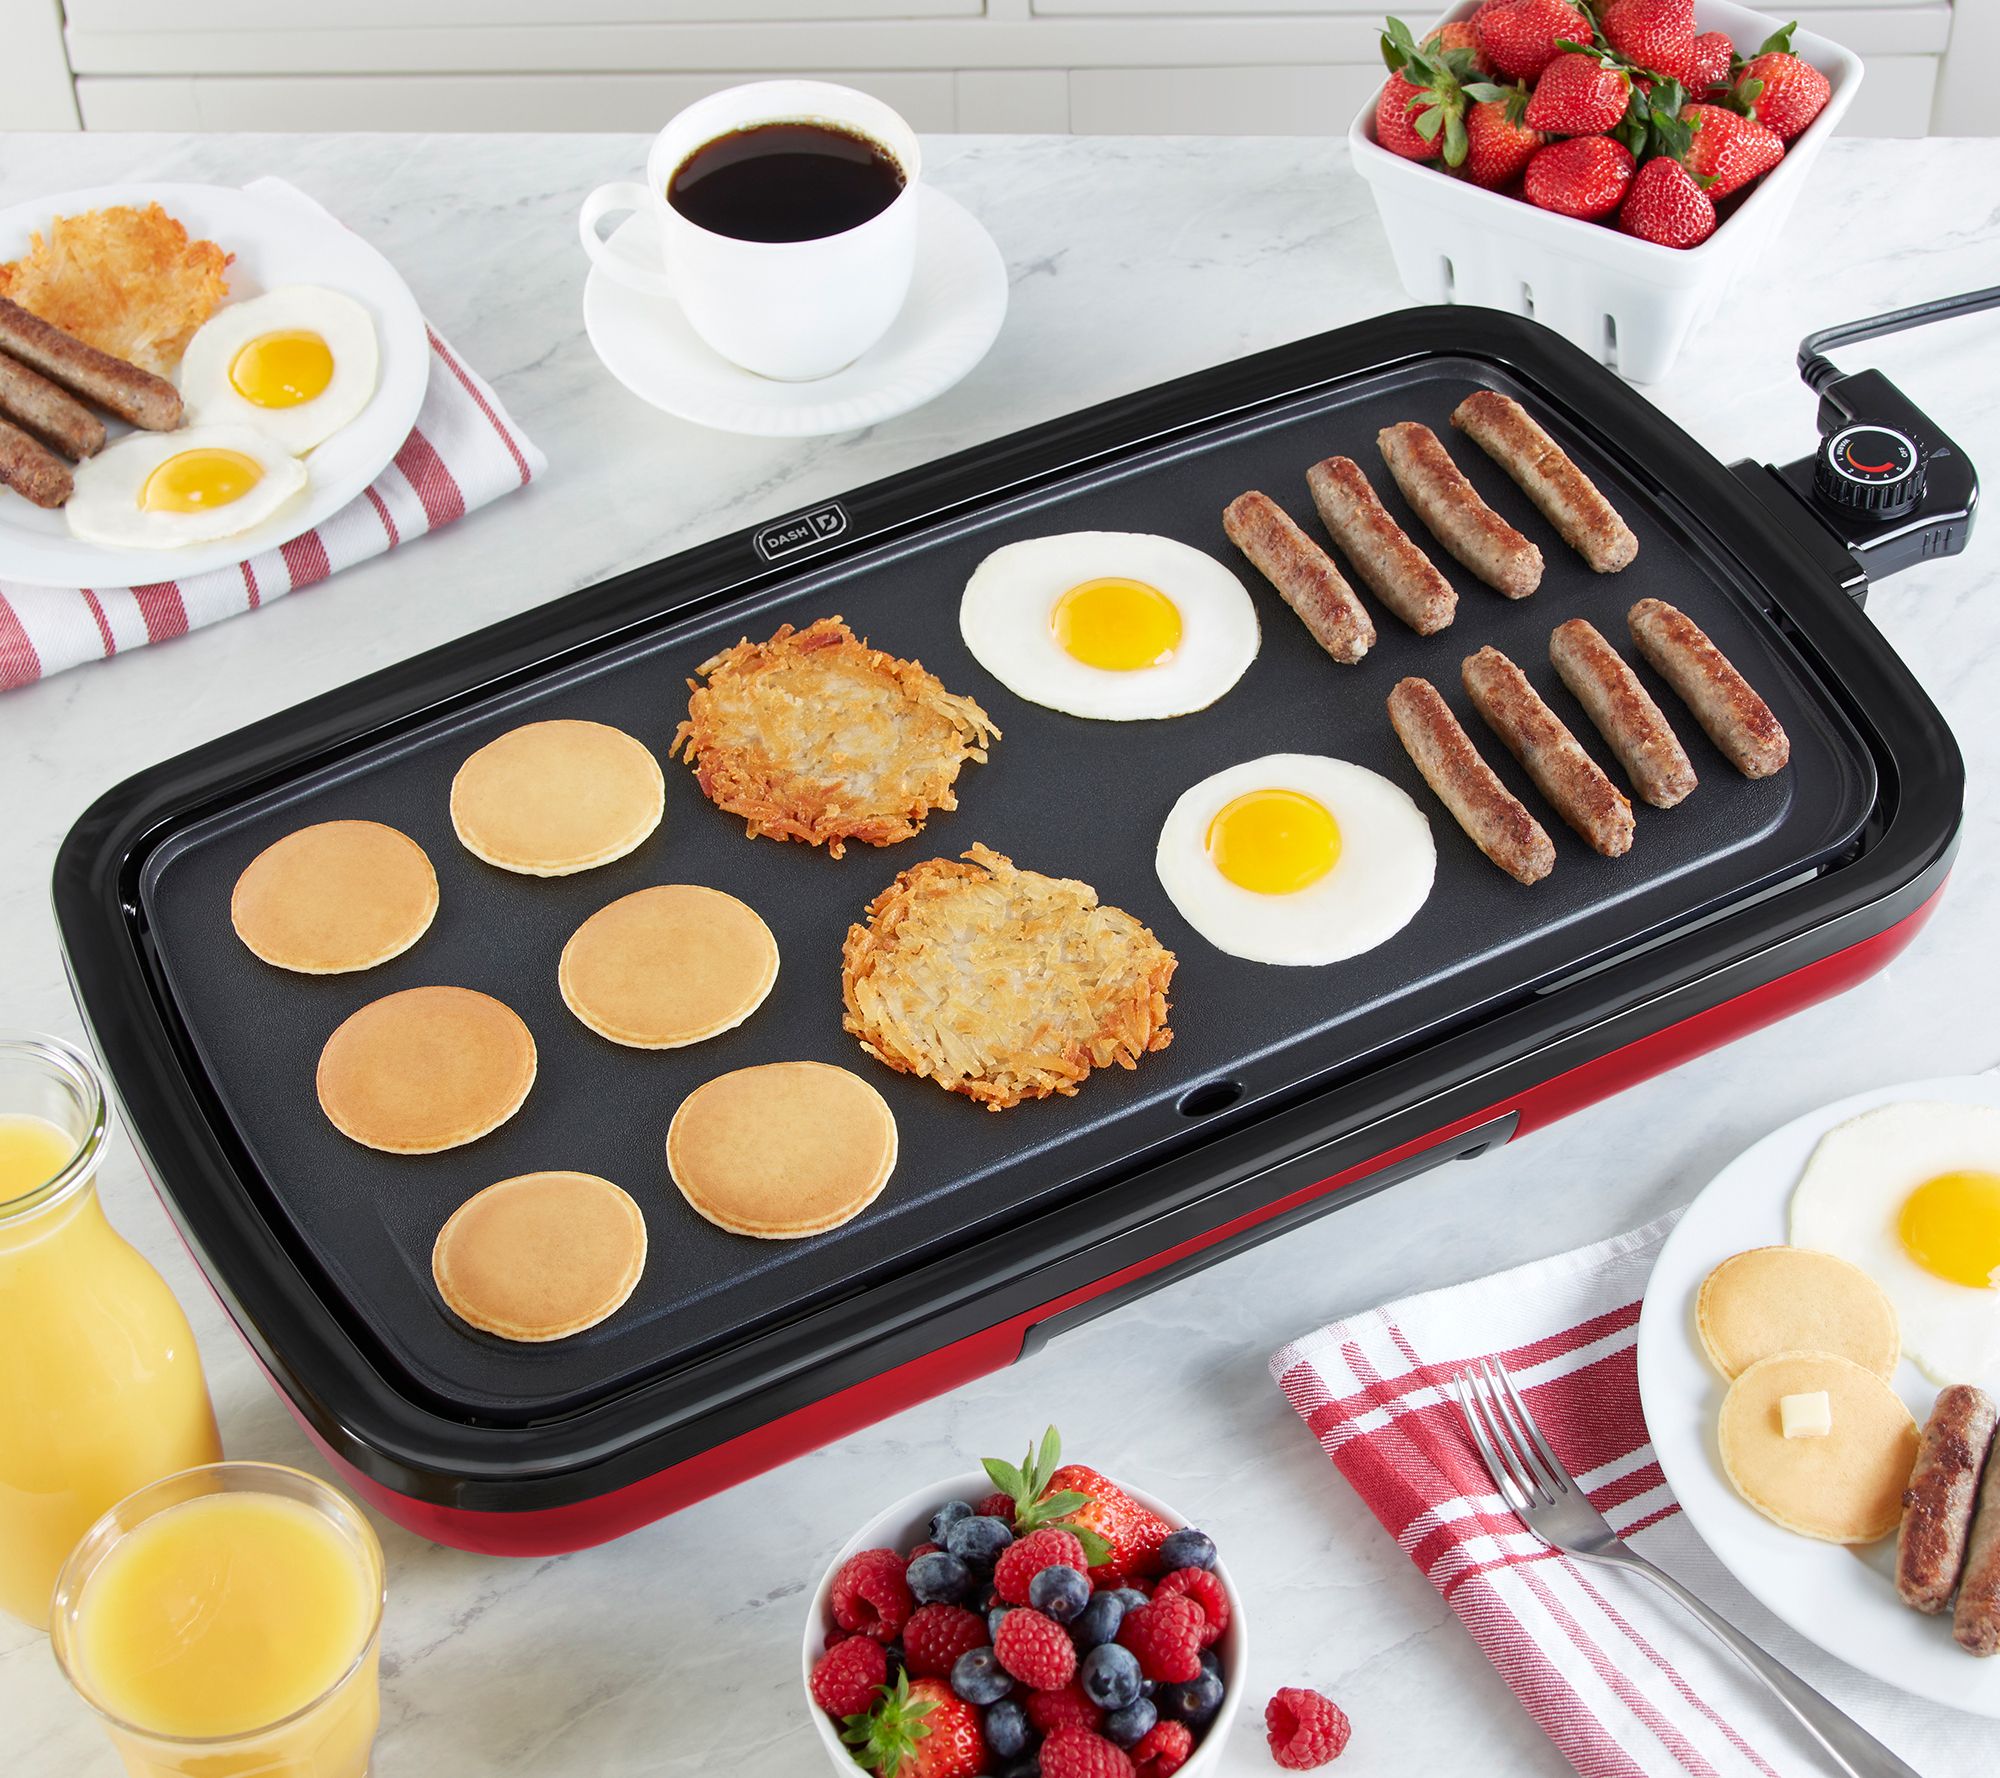 DASH Deluxe Everyday Electric Griddle Reviews